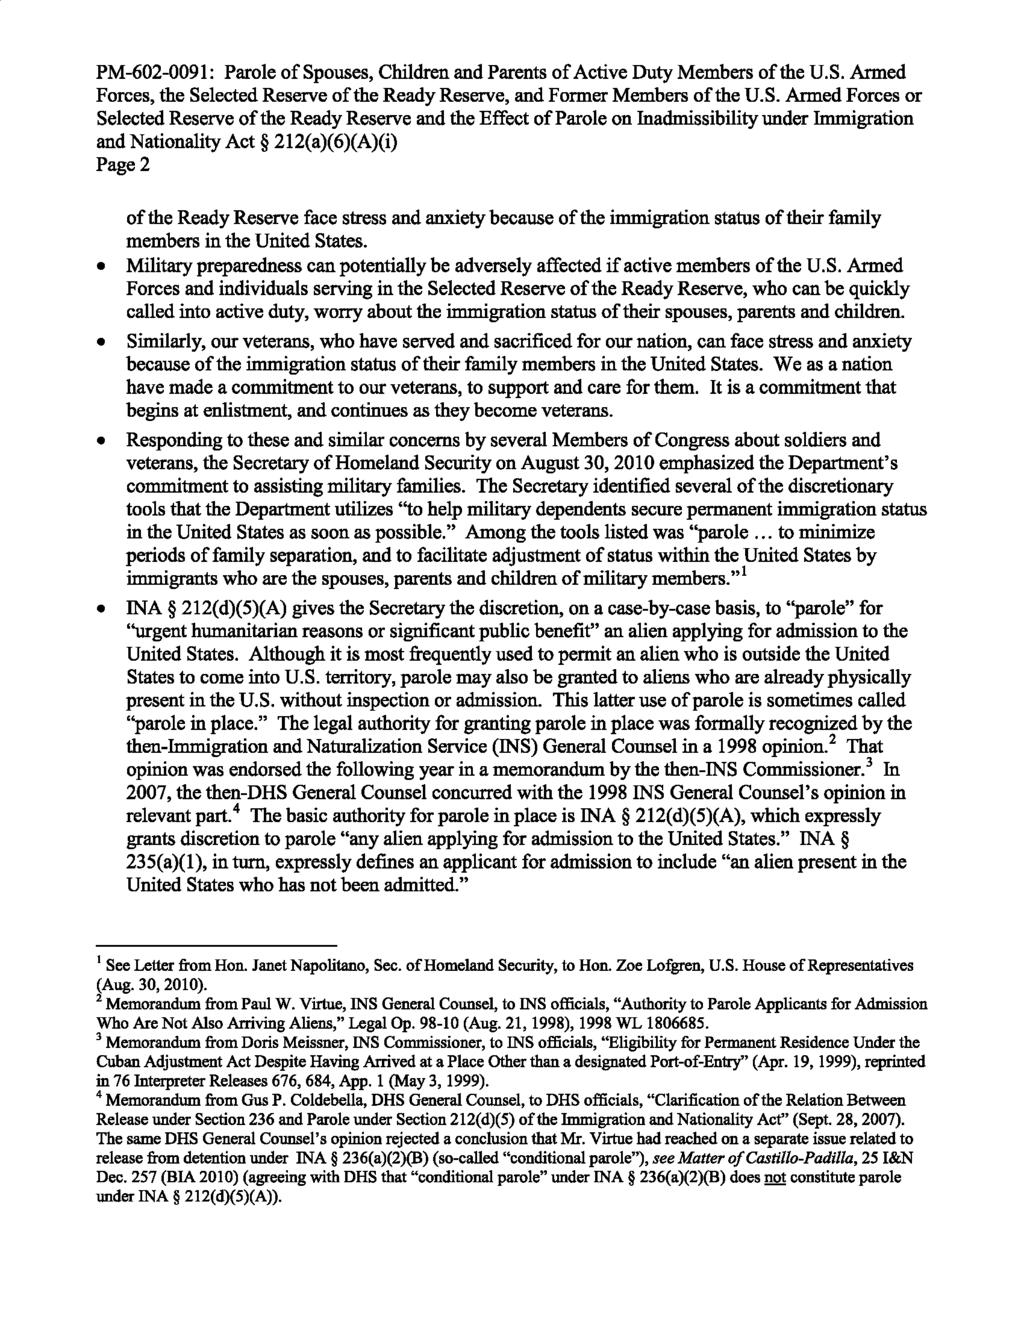 Page2 of the Ready Reserve face stress and anxiety because of the immigration status of their family members in the United States.